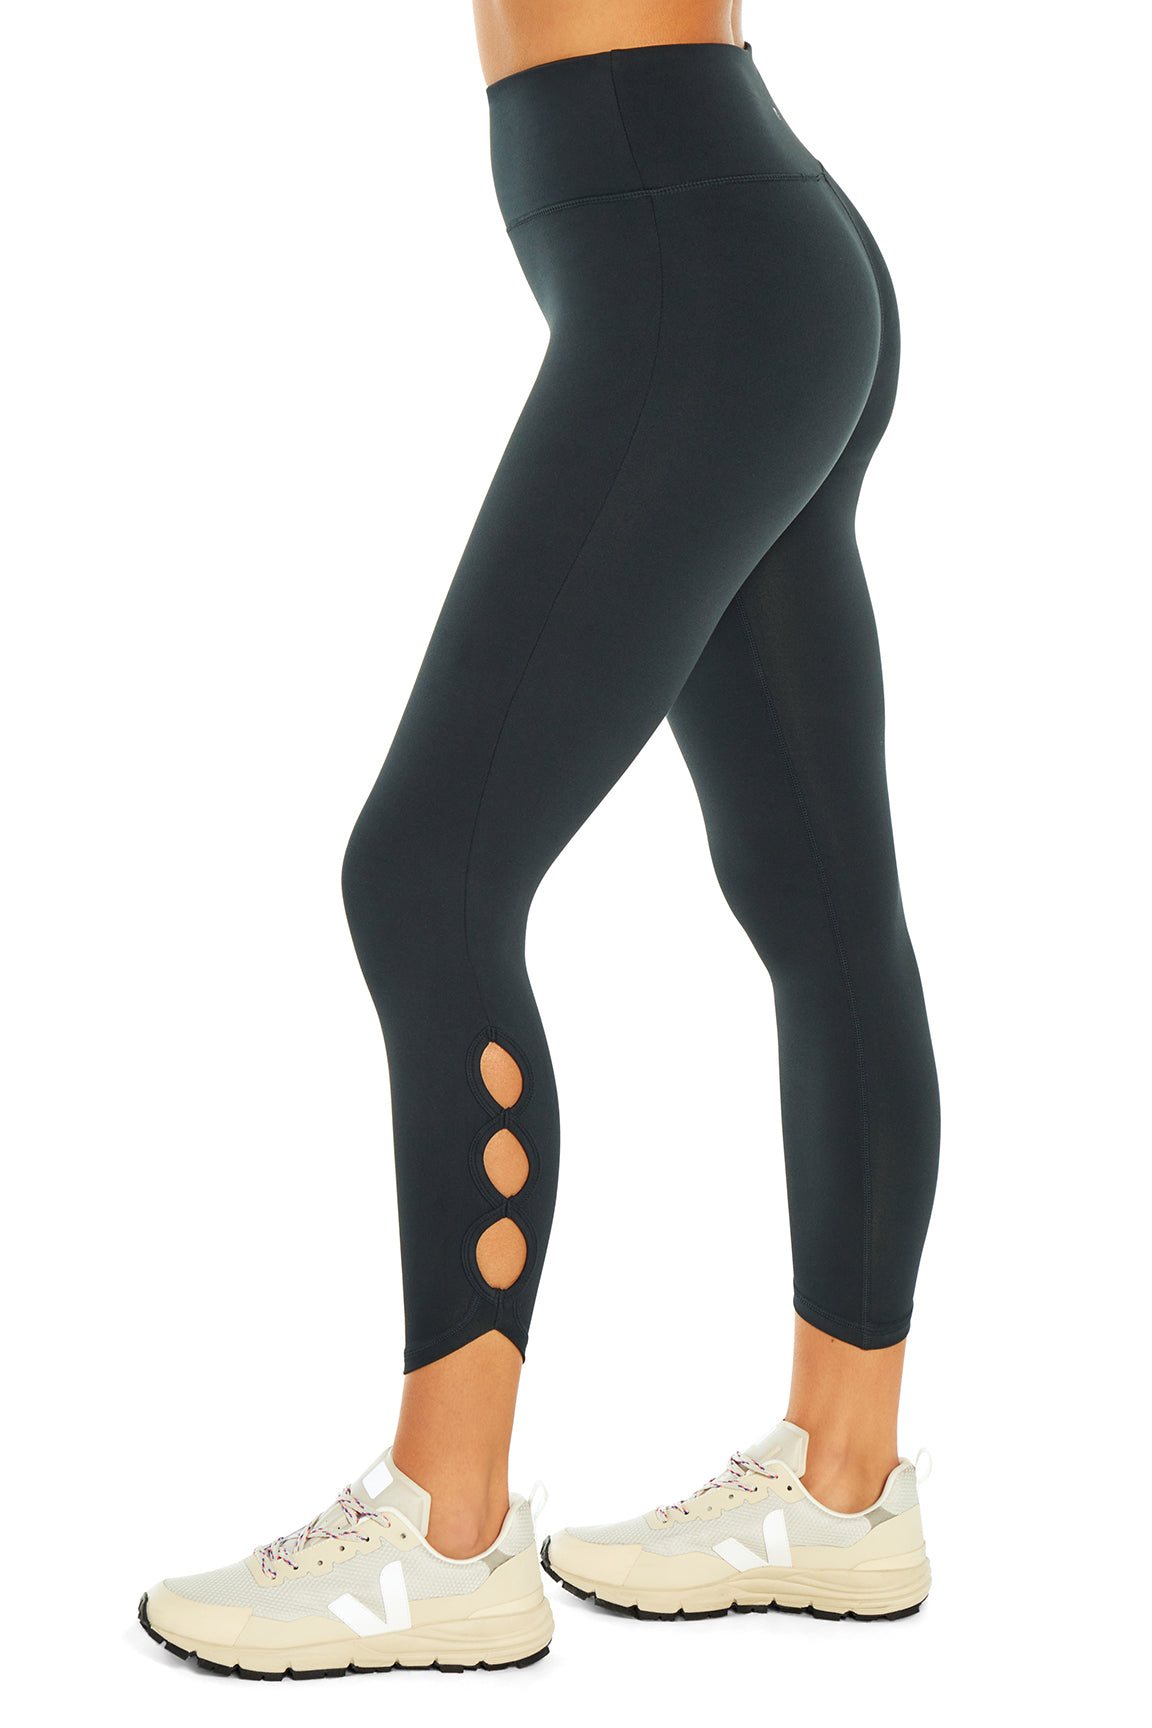 The Balance Collection by Marika Leggings – Deals on Designers